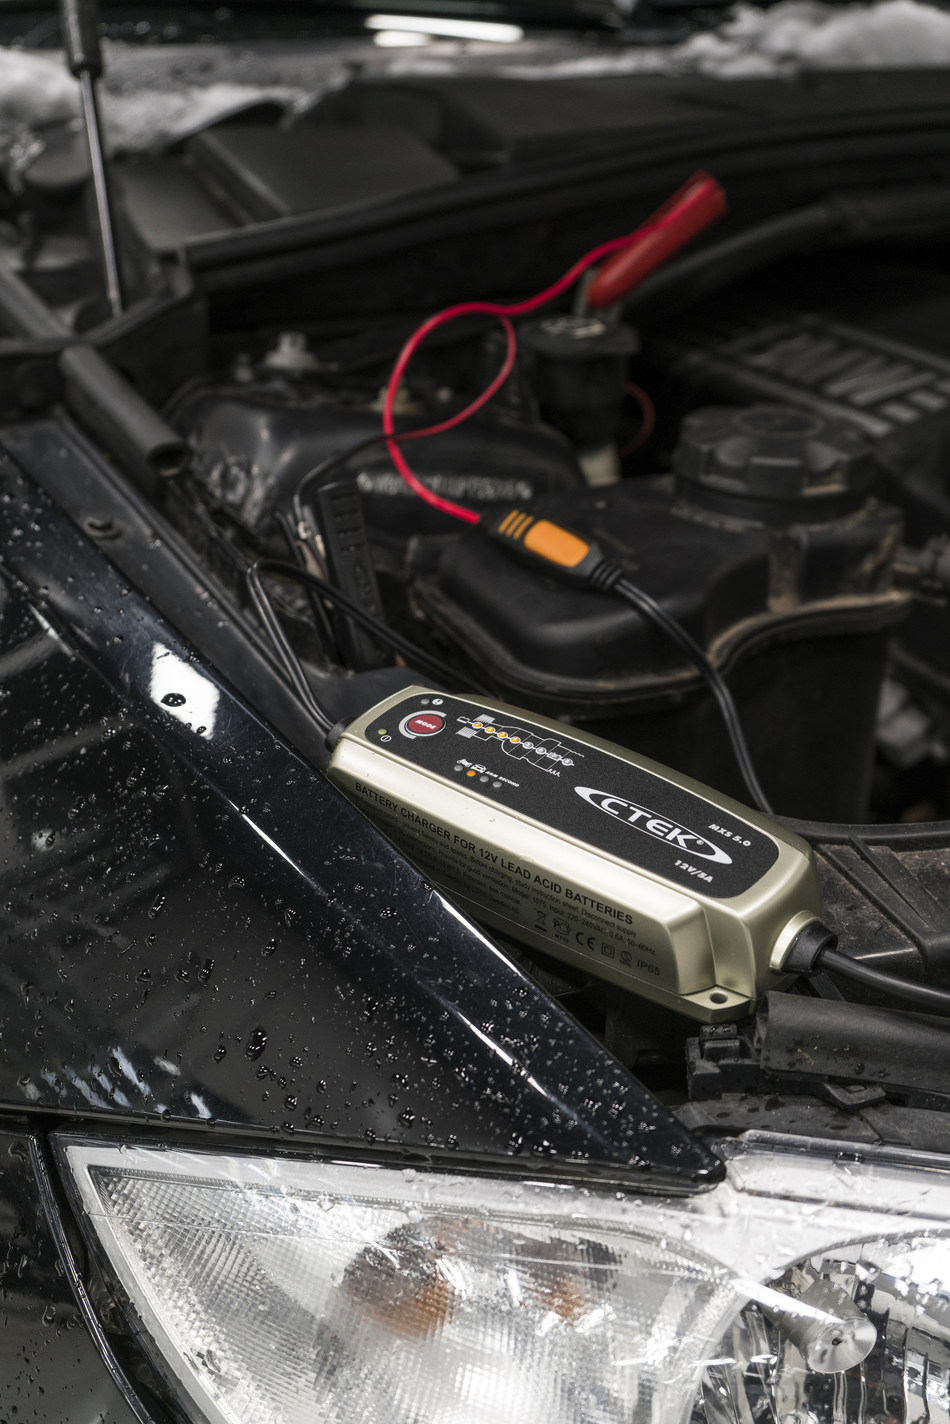 Proactive battery care is needed, so that when you want to use your vehicle, the battery is charged and ready to go (PRNewsfoto/CTEK Sweden AB)